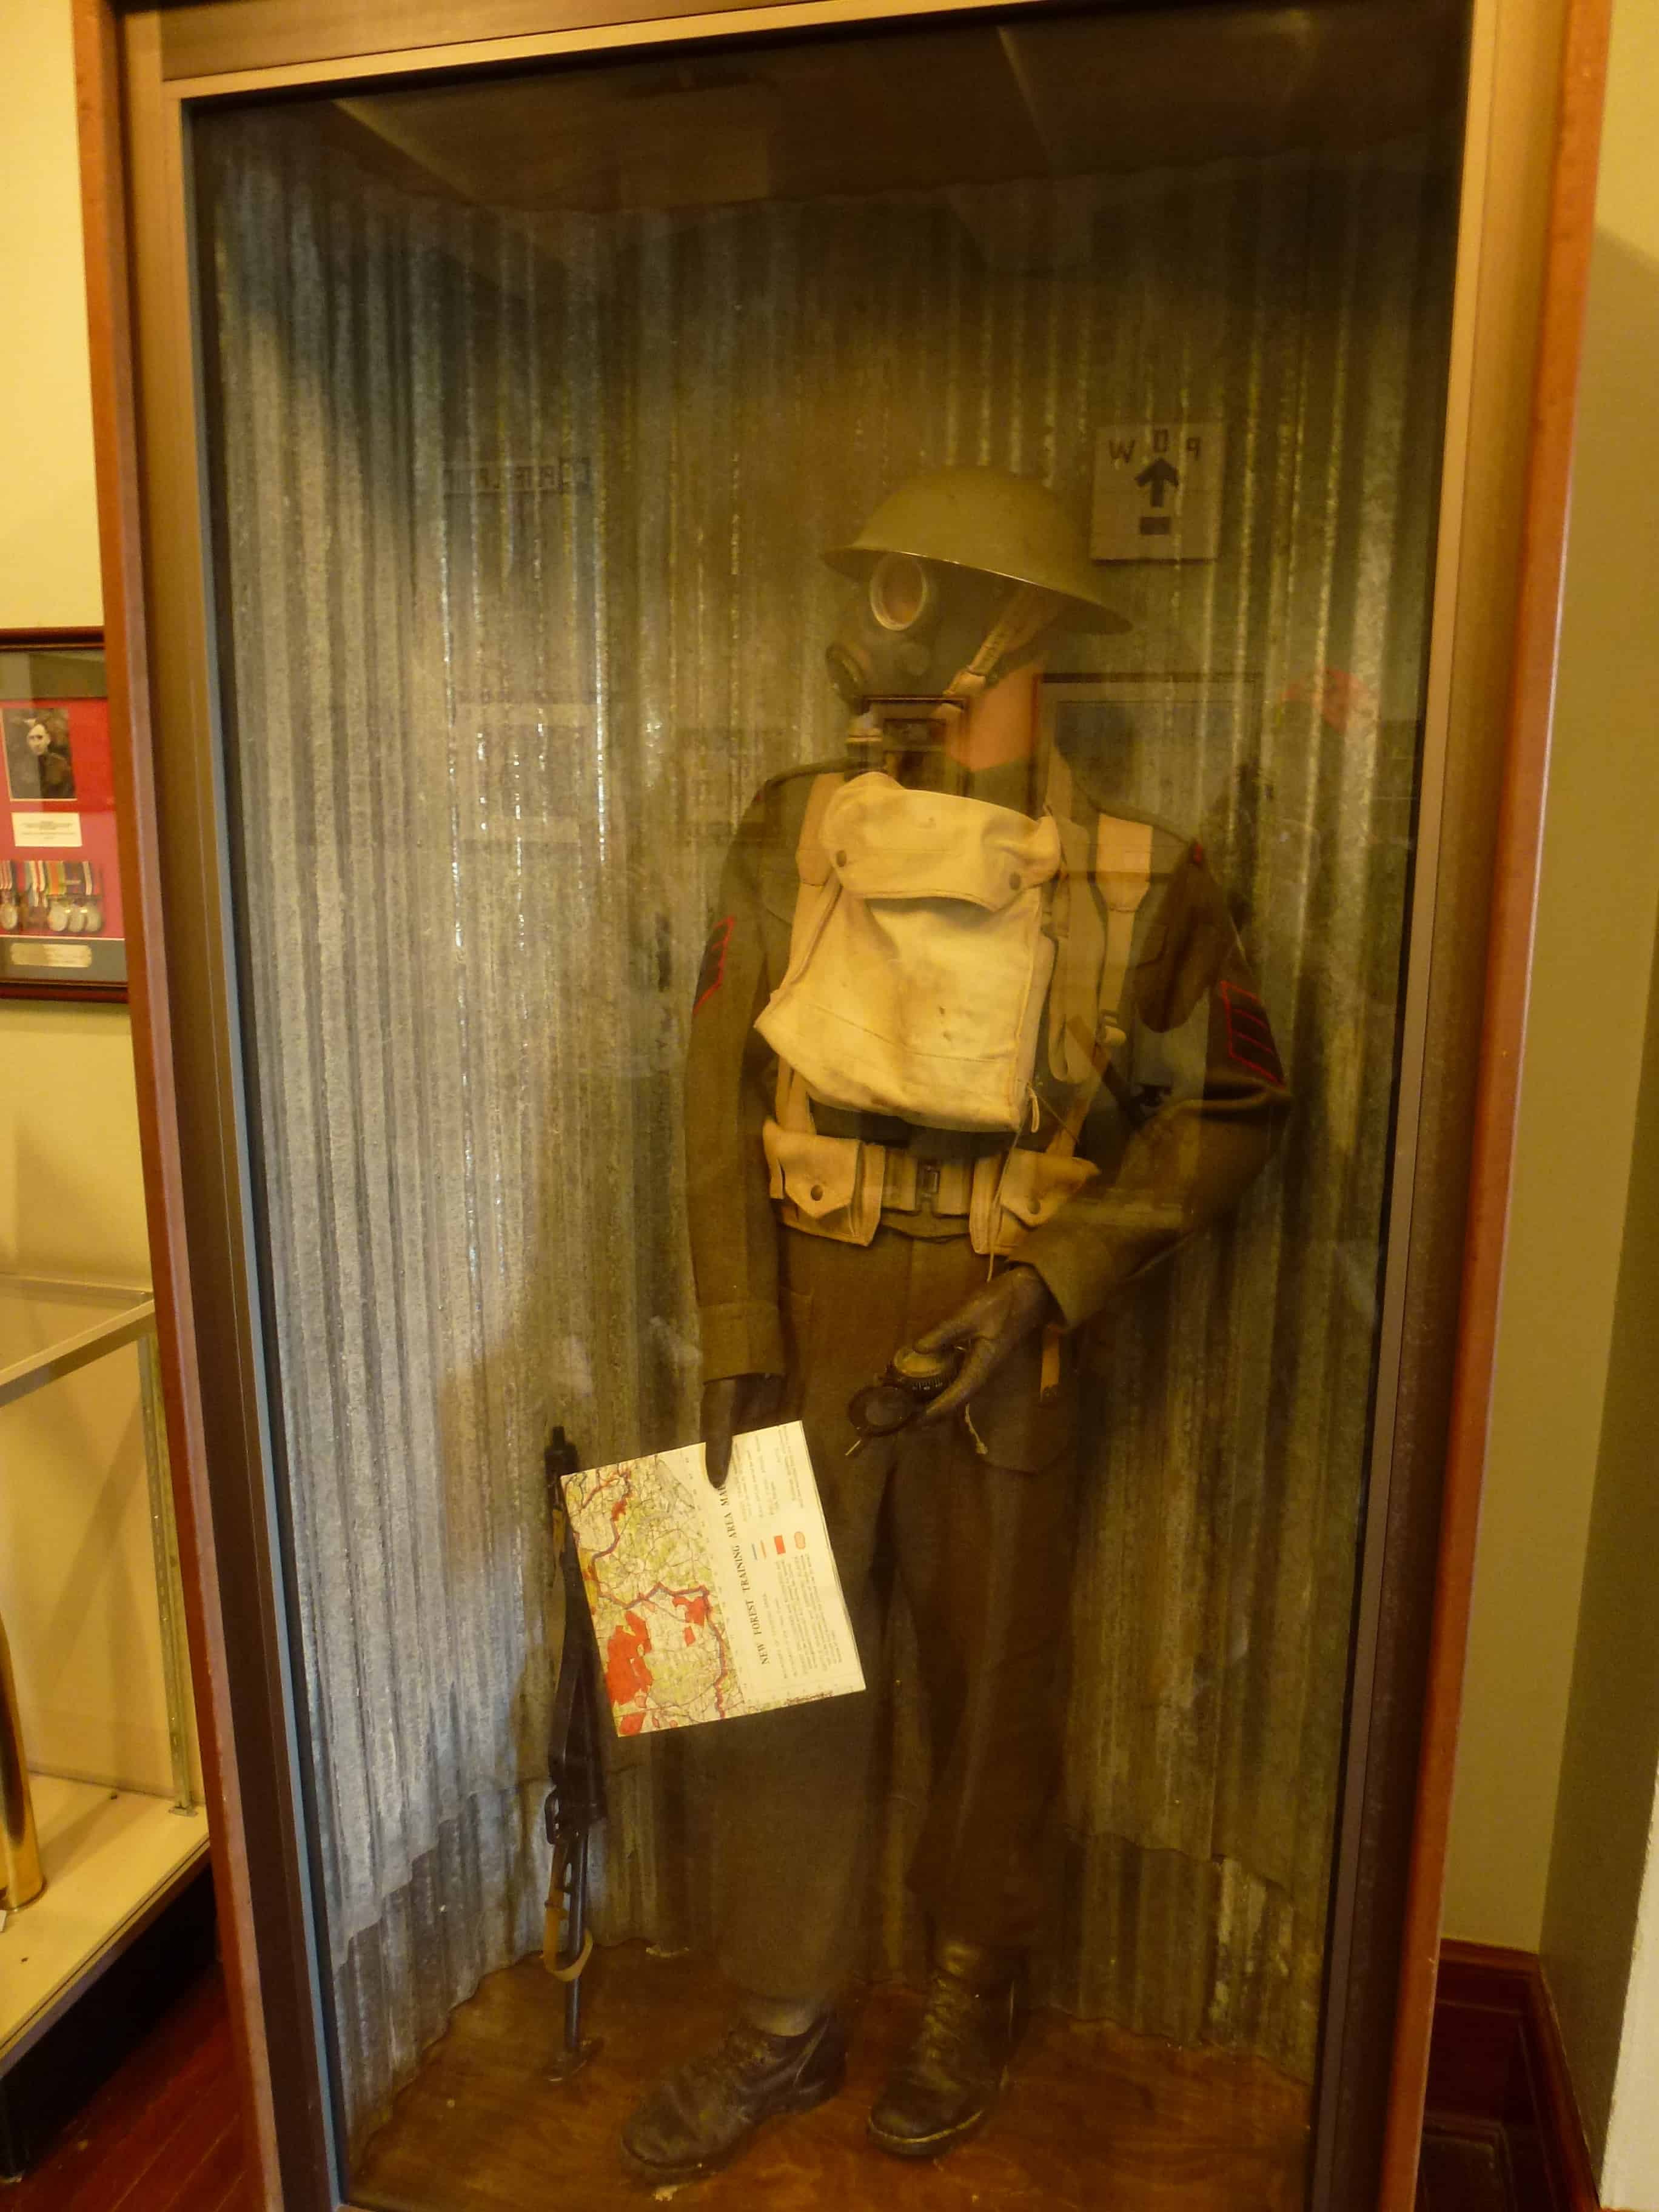 Queen's Own Rifles Museum at Casa Loma in Toronto, Ontario, Canada